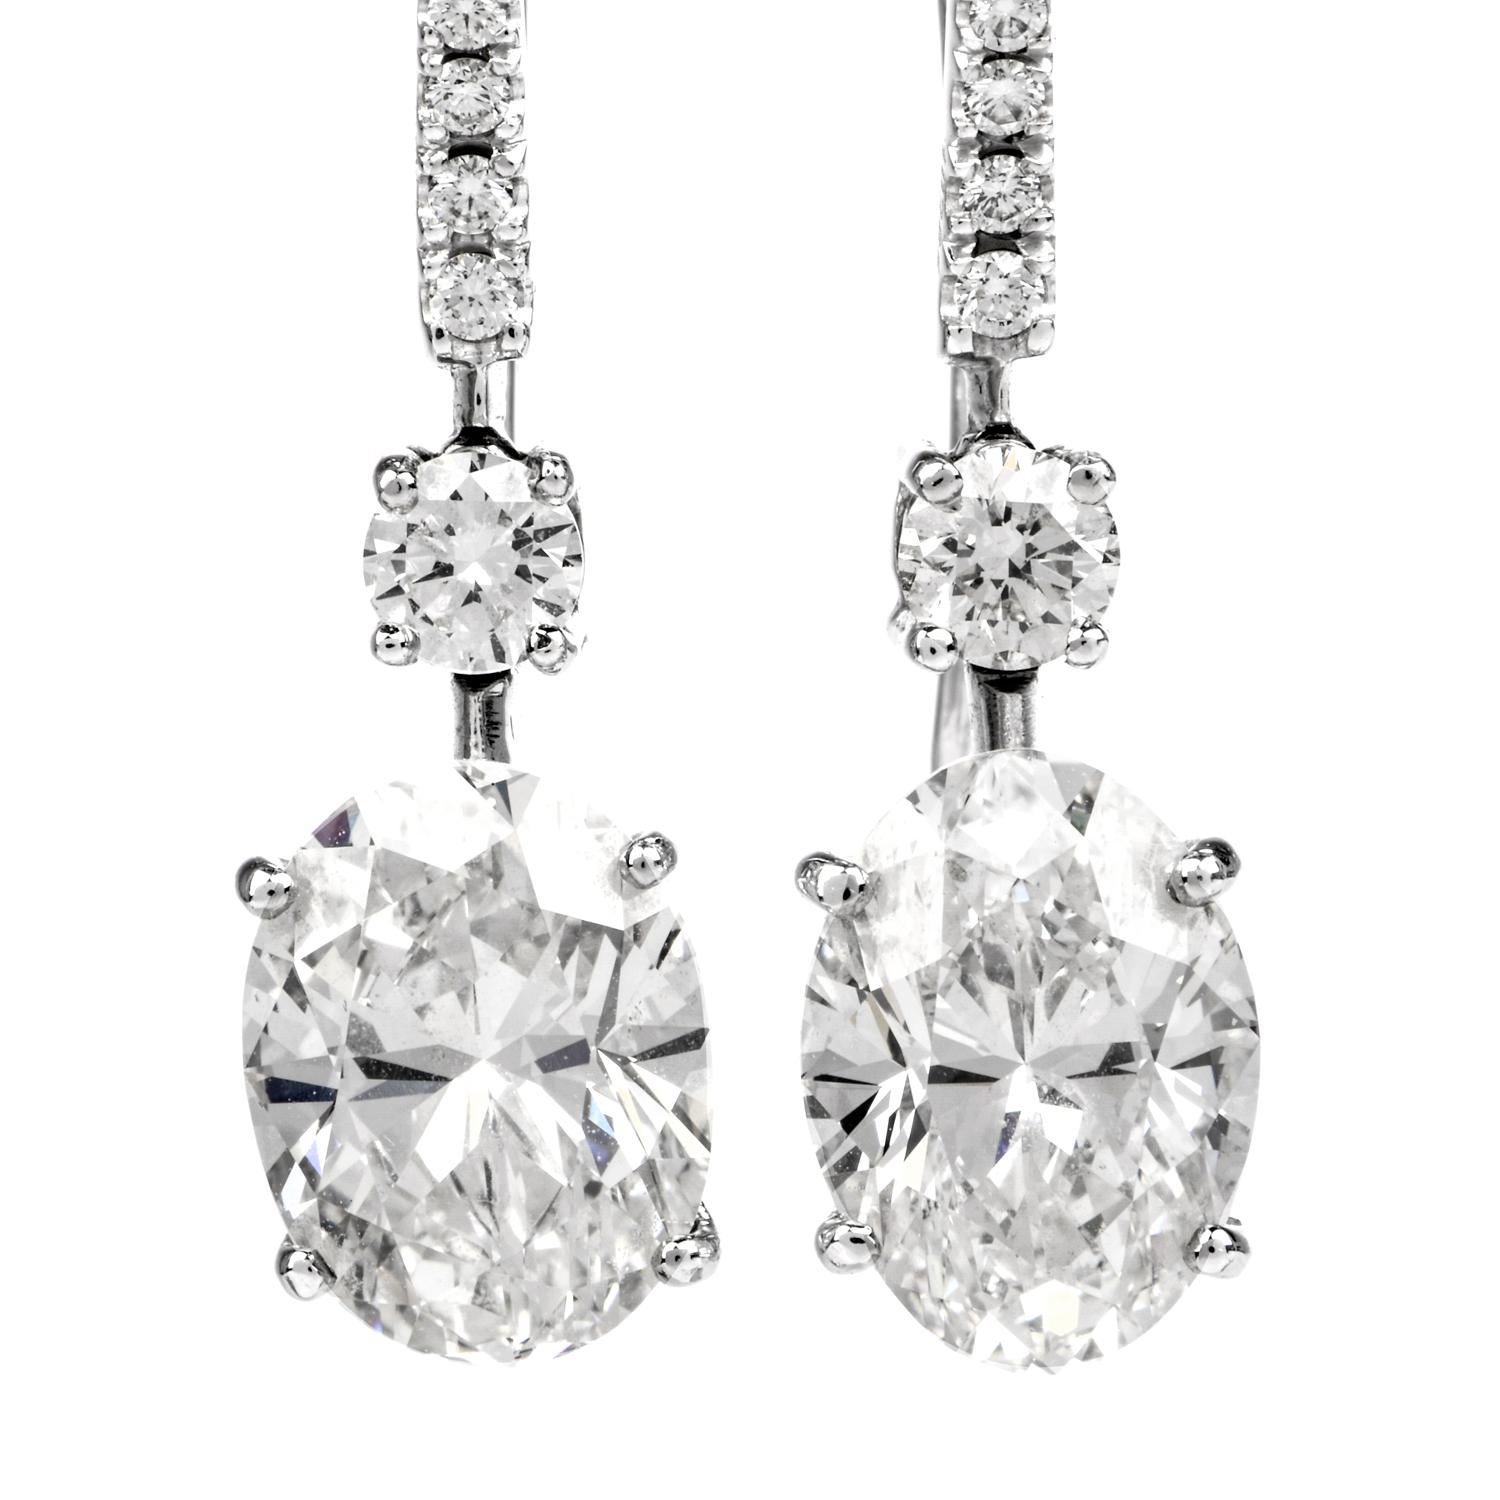 This stunning pair of diamond dangle huggie earrings is crafted in solid platinum by famed jeweler Graff, weighing 4.8 grams and measuring 30mm long x  7mm wide. Composed of two prominent prong-set oval brilliant GIA lab reported diamonds, one